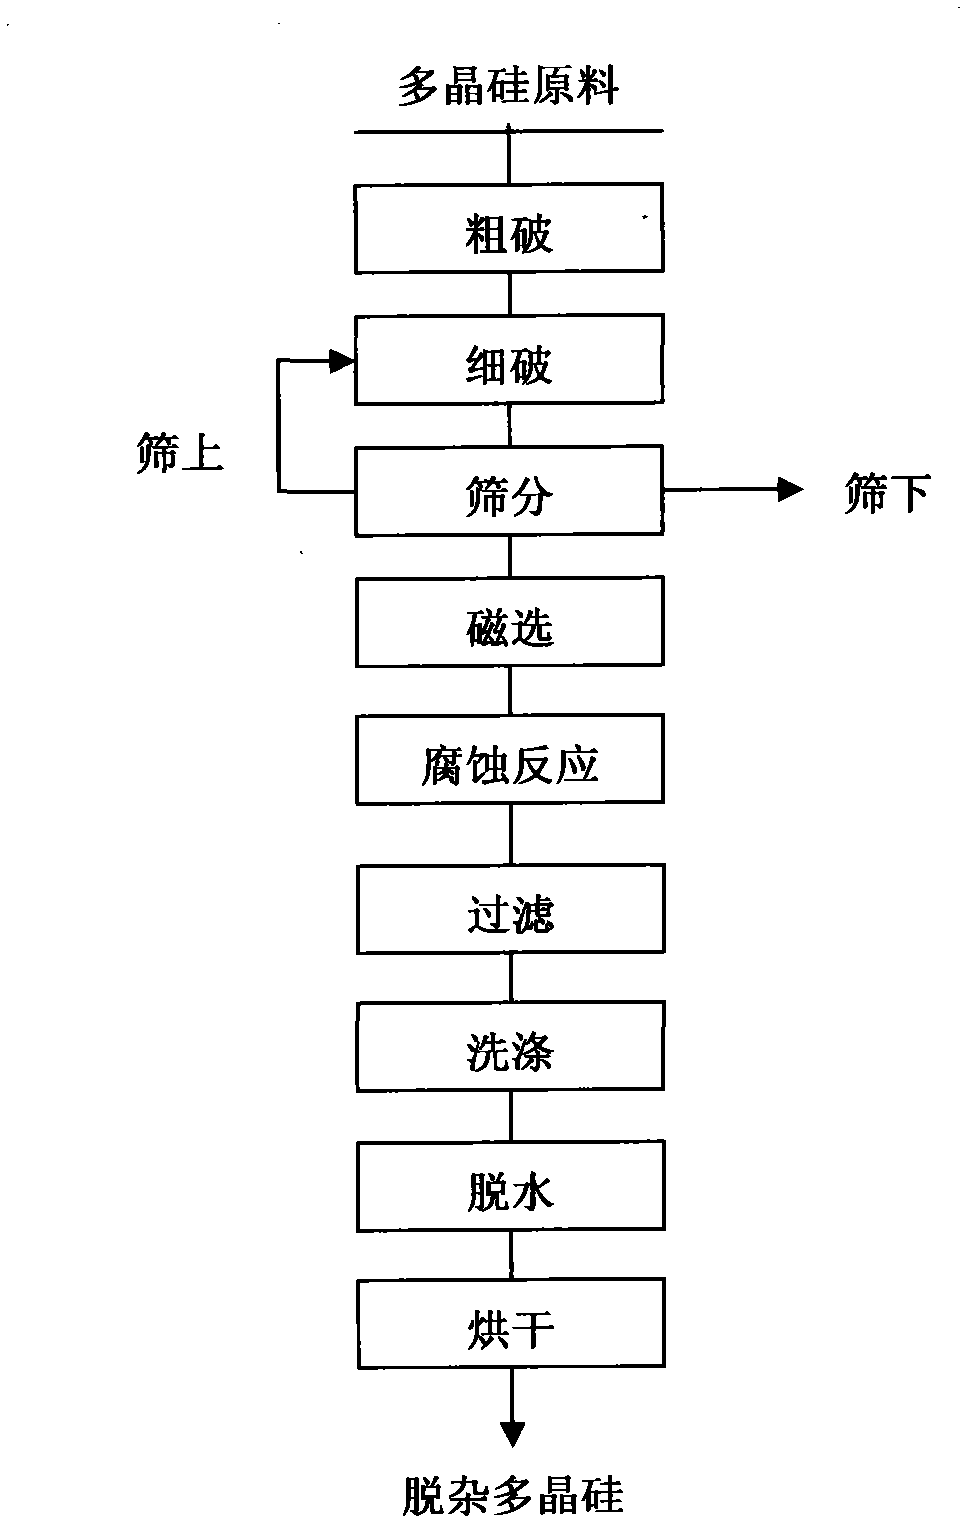 Method for removing impurities on surface of metal silicon